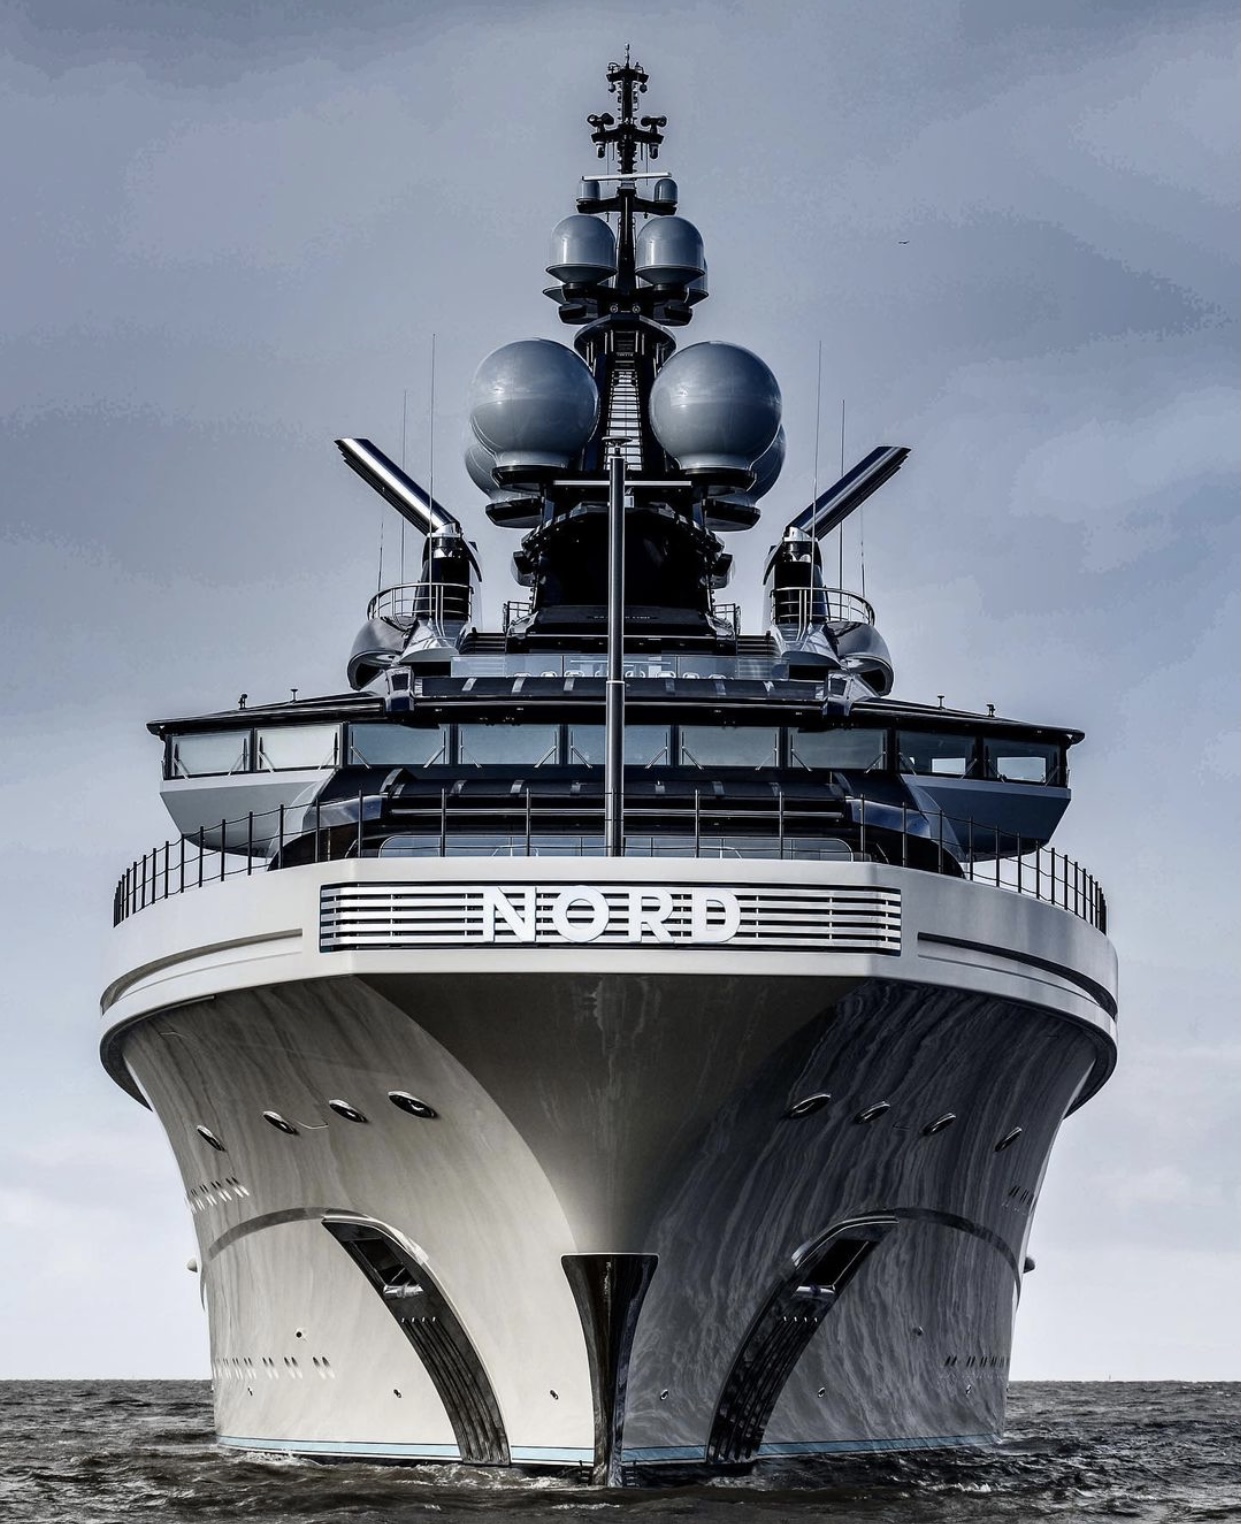 who owns nord yacht